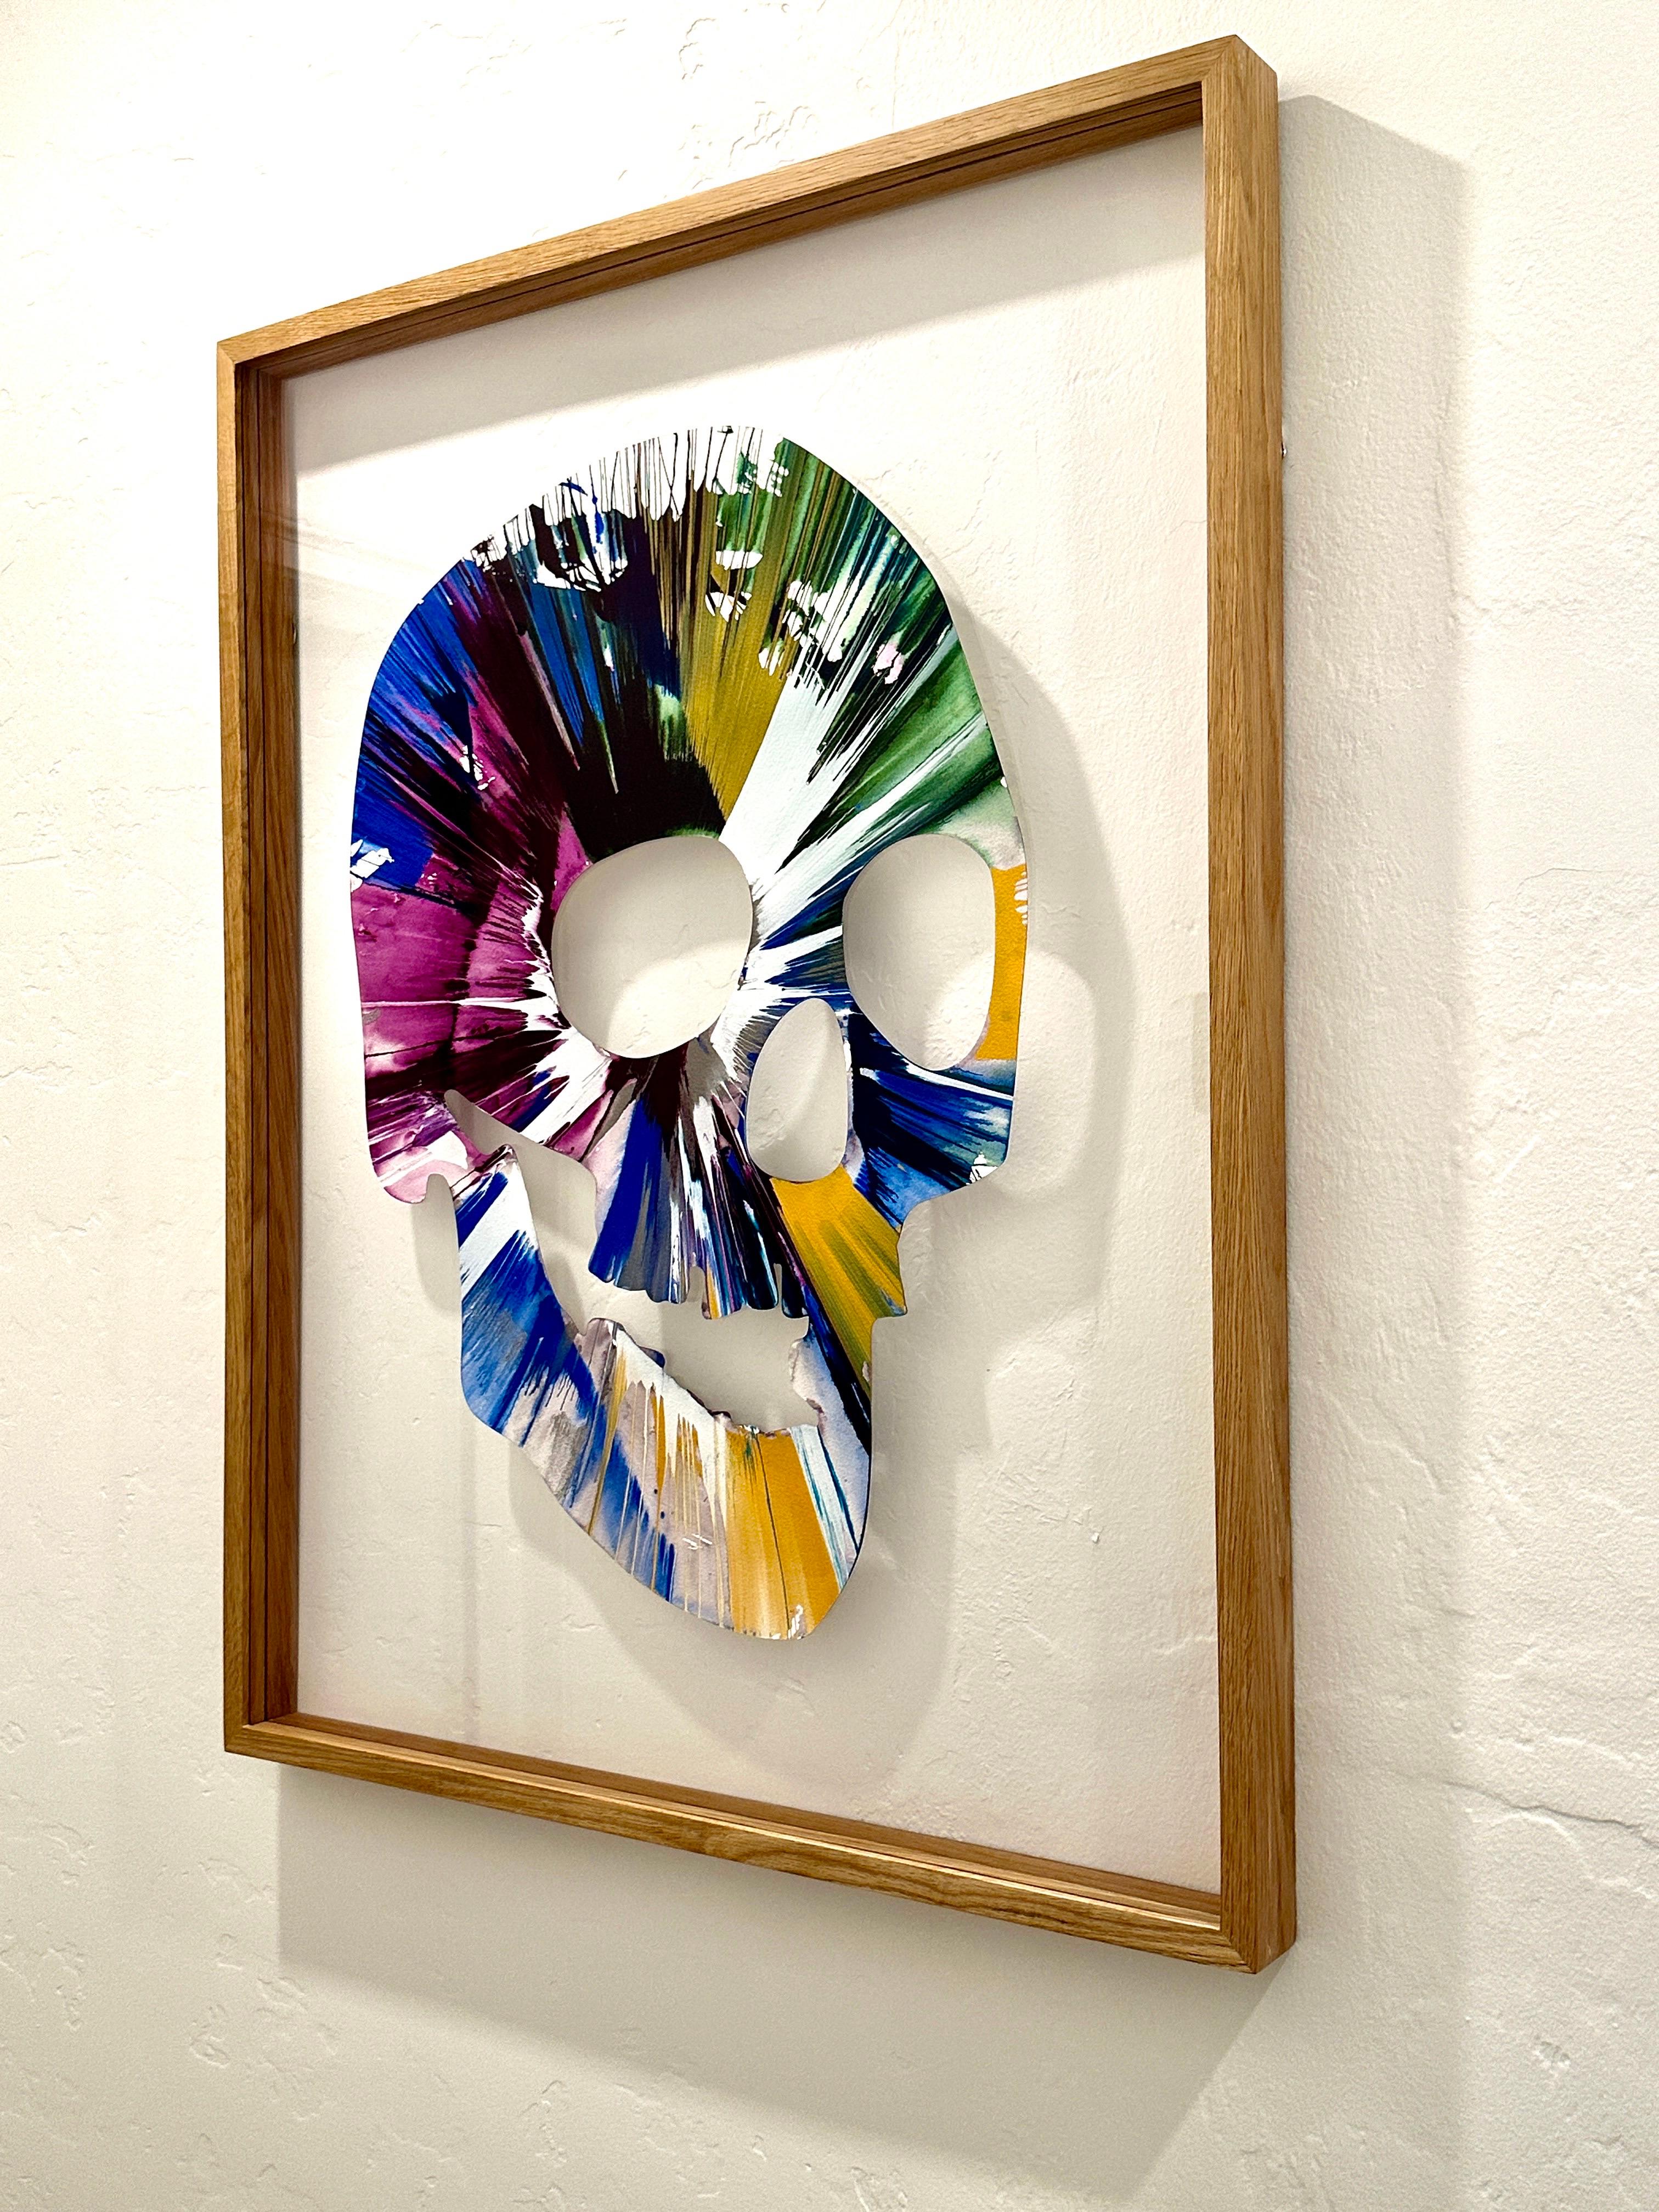 Damien Hirst Skull Spin Painting (Created at Damien Hirst Spin Workshop), 2009 For Sale 4